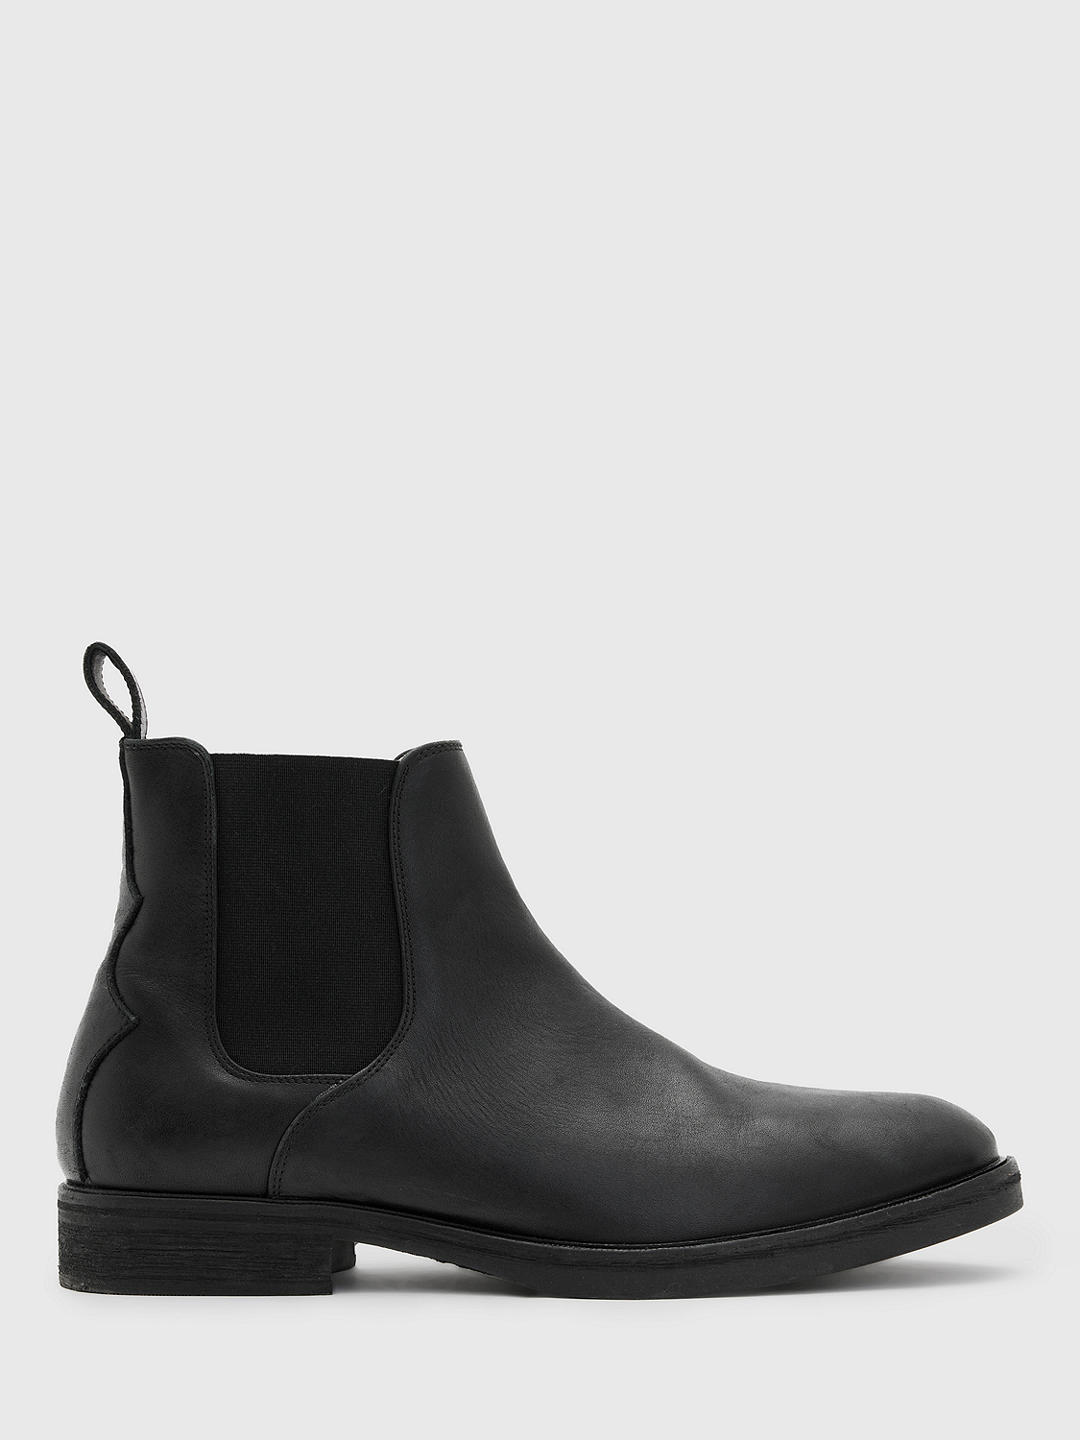 AllSaints Creed Leather Chelsea Boots, Black